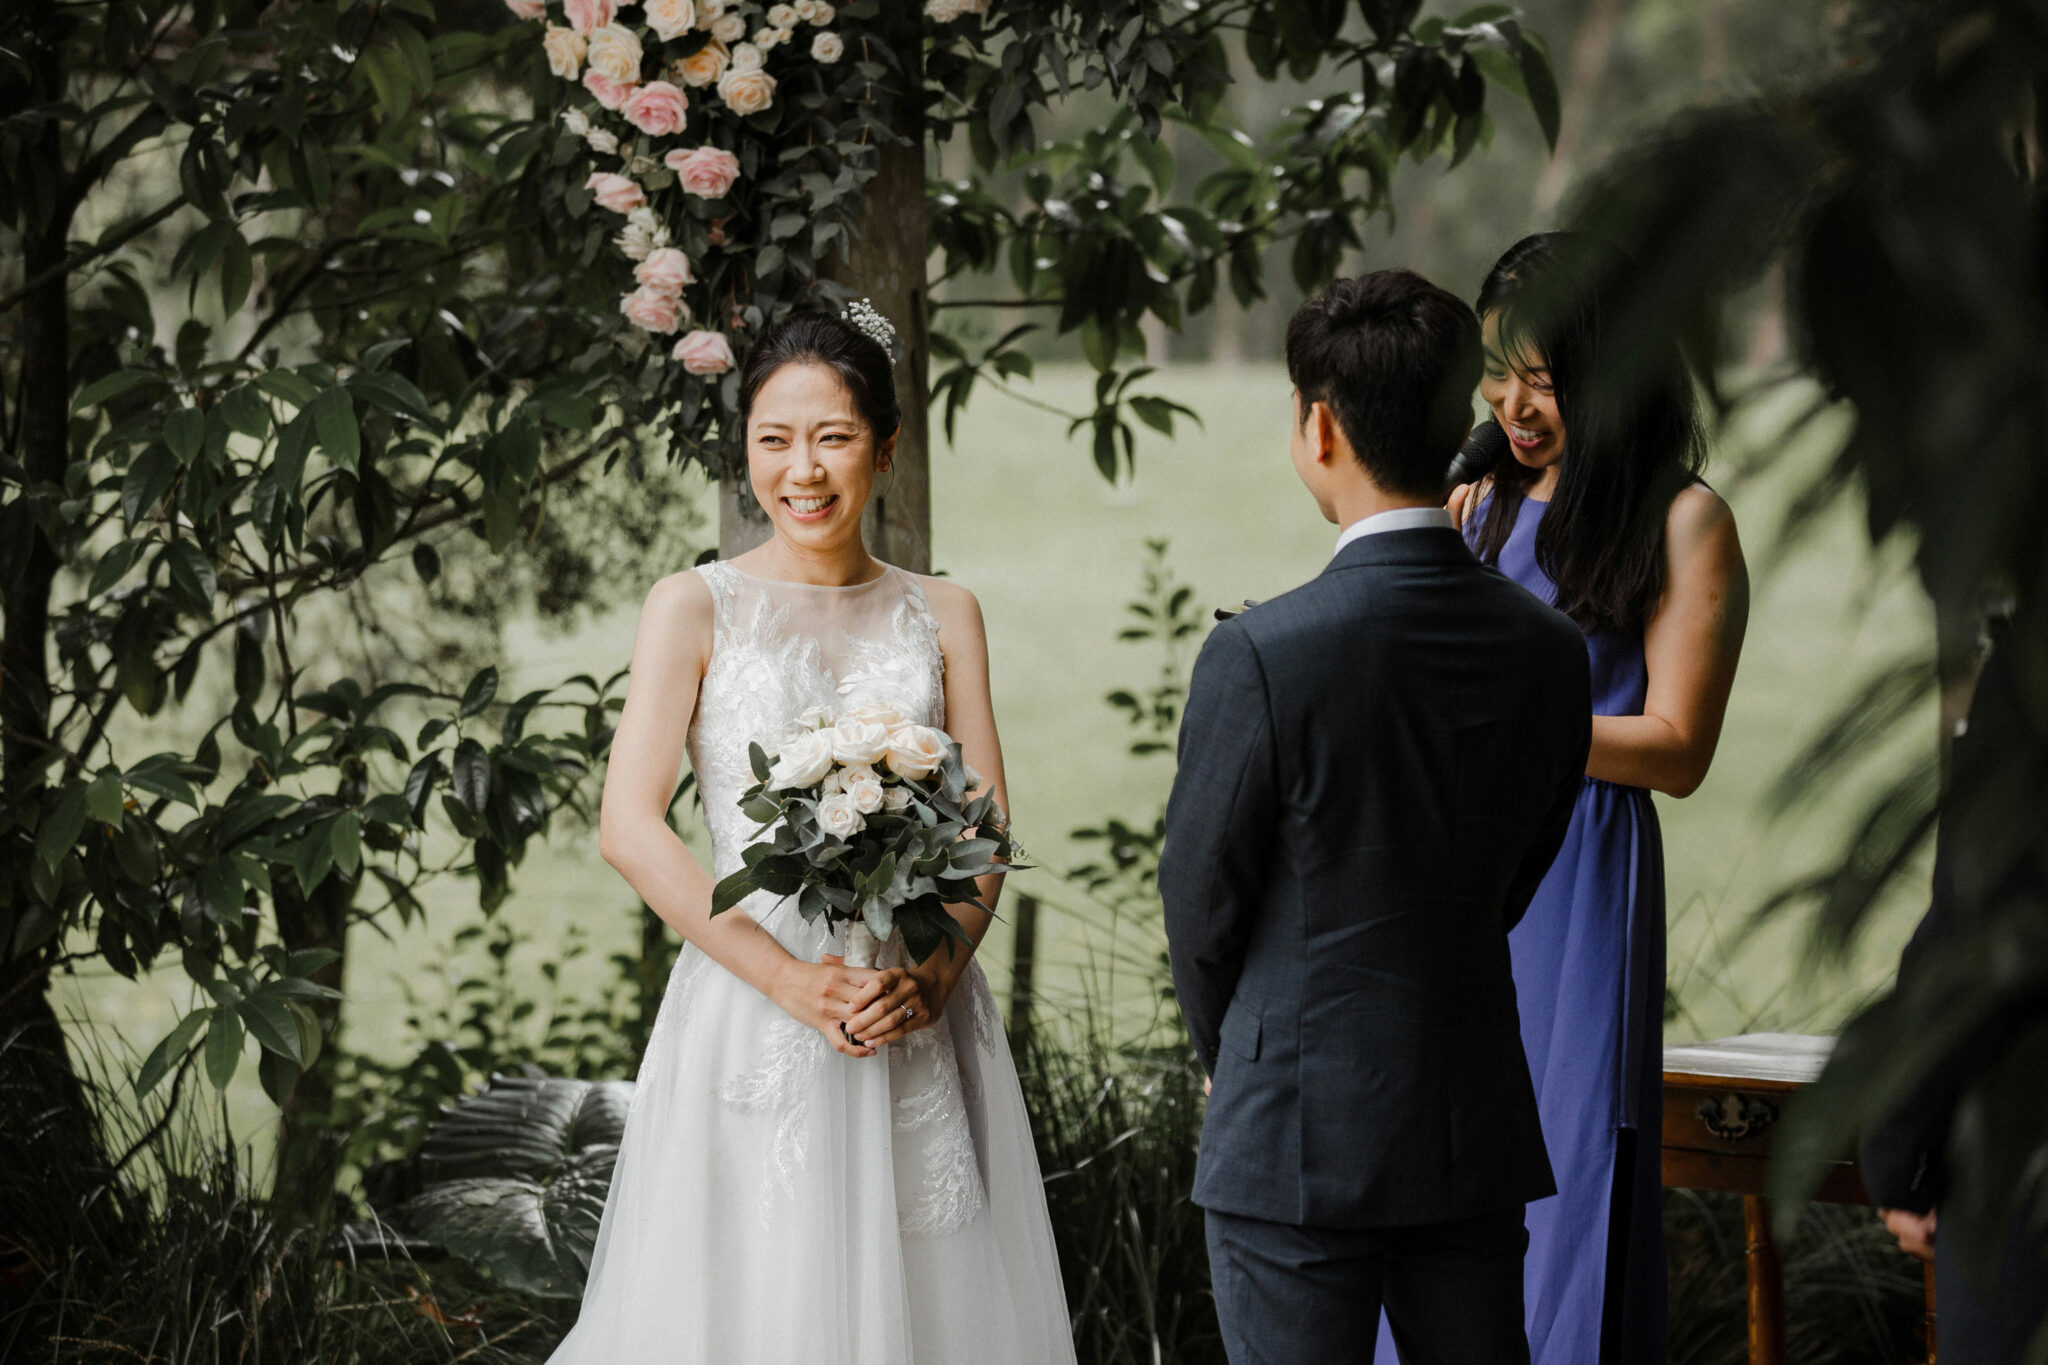 bride smiling during the ceremony